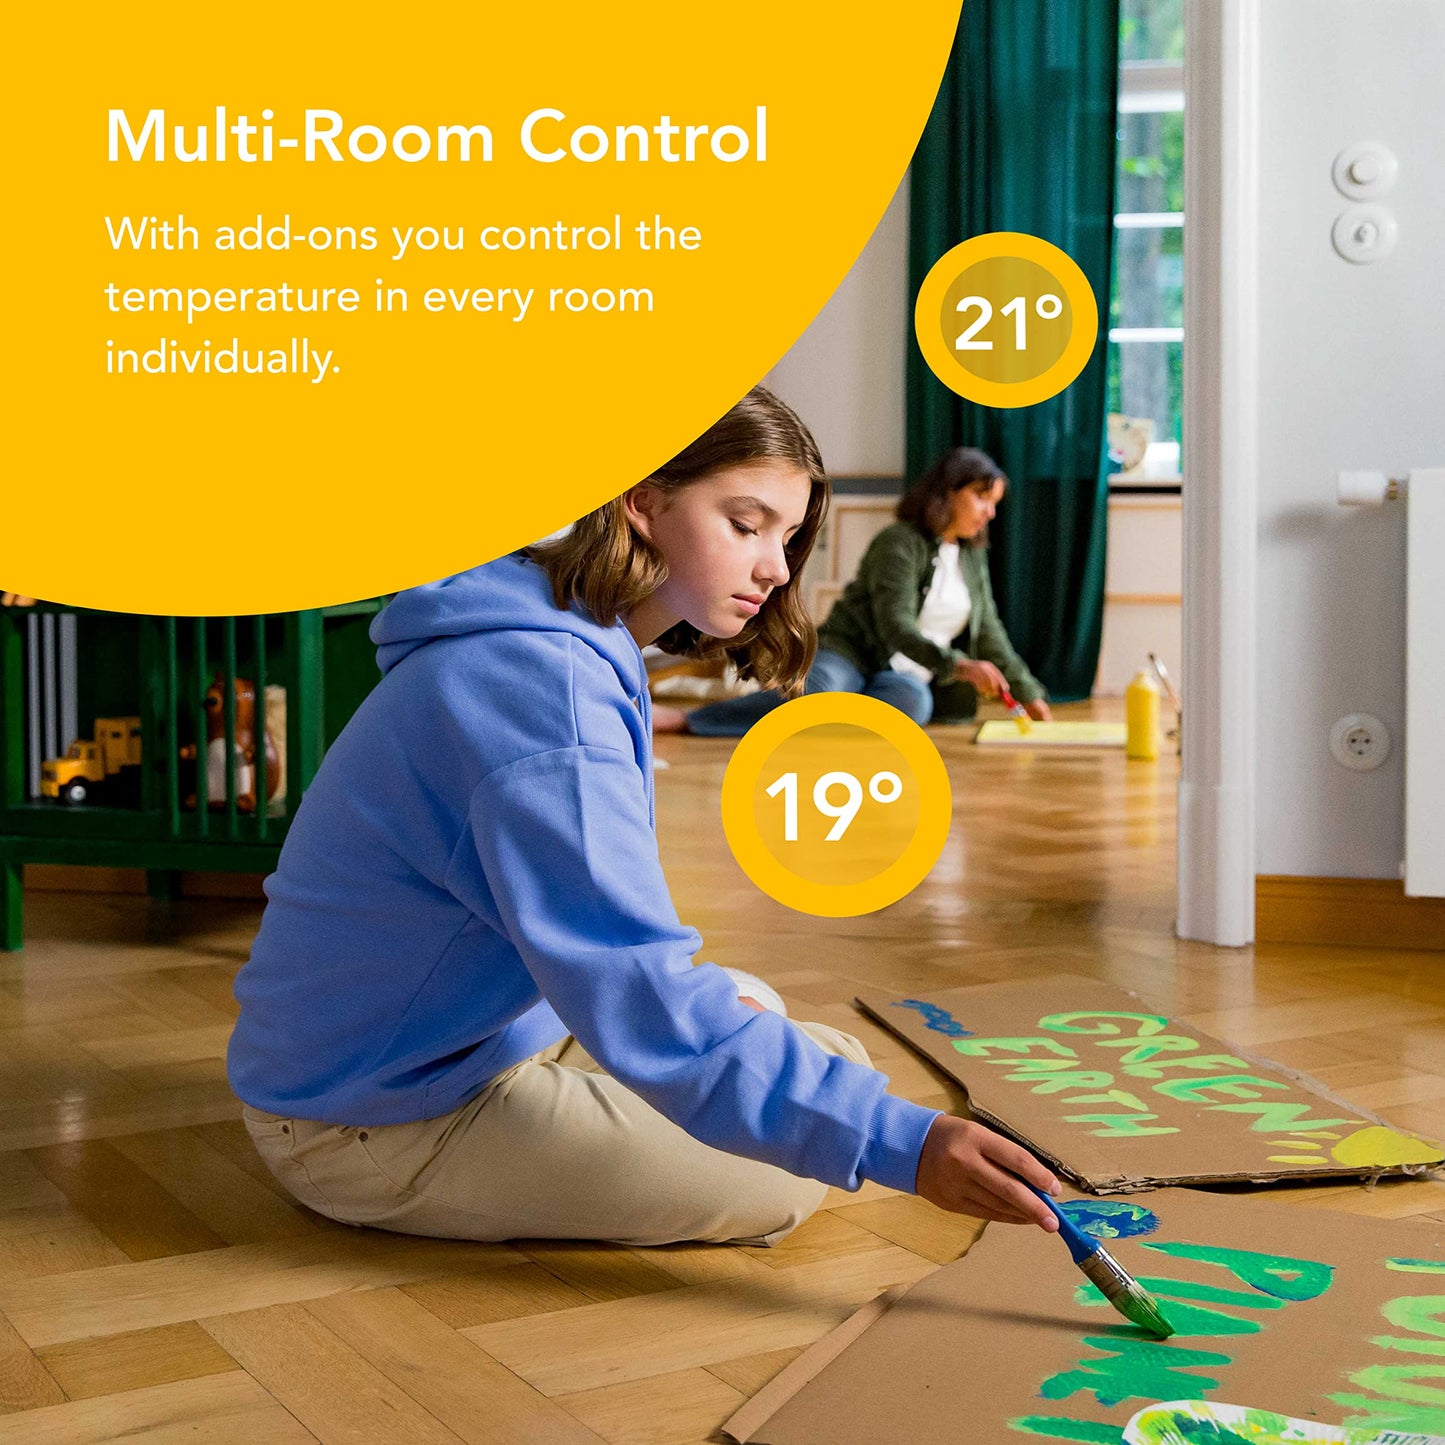 tado° Wired Smart Thermostat Starter Kit V3+ Gives You Full Control Over Your Heating From Anywhere, Save Energy, Easy DIY Installation, Works With Amazon Alexa, Siri and Google Assistant